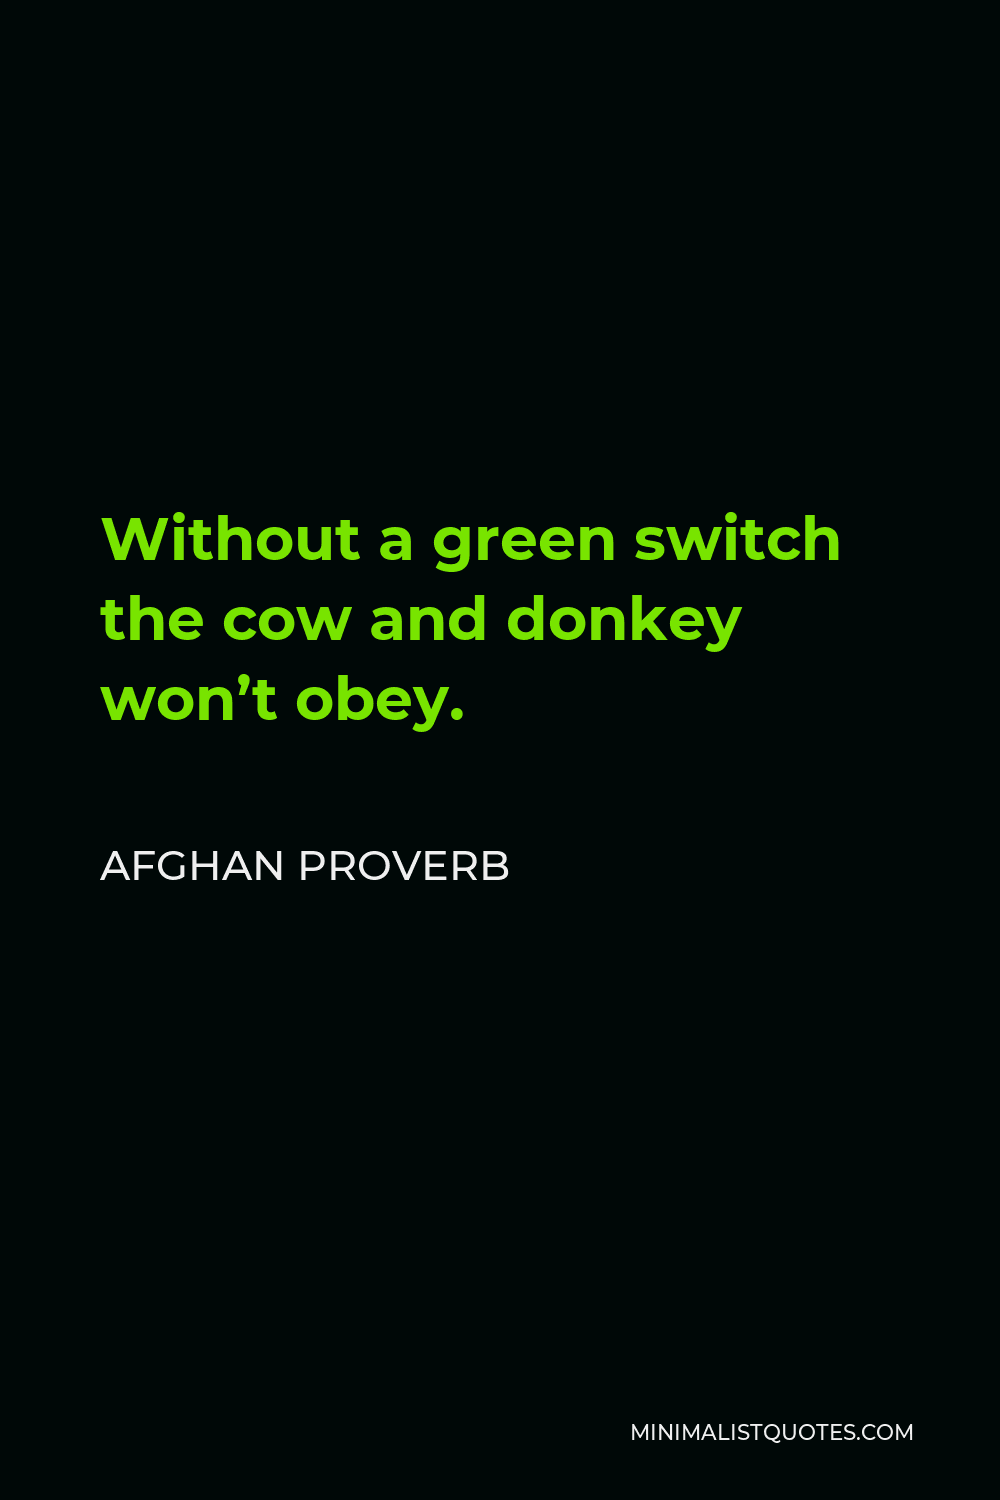 Afghan Proverb Quote - Without a green switch the cow and donkey won’t obey.